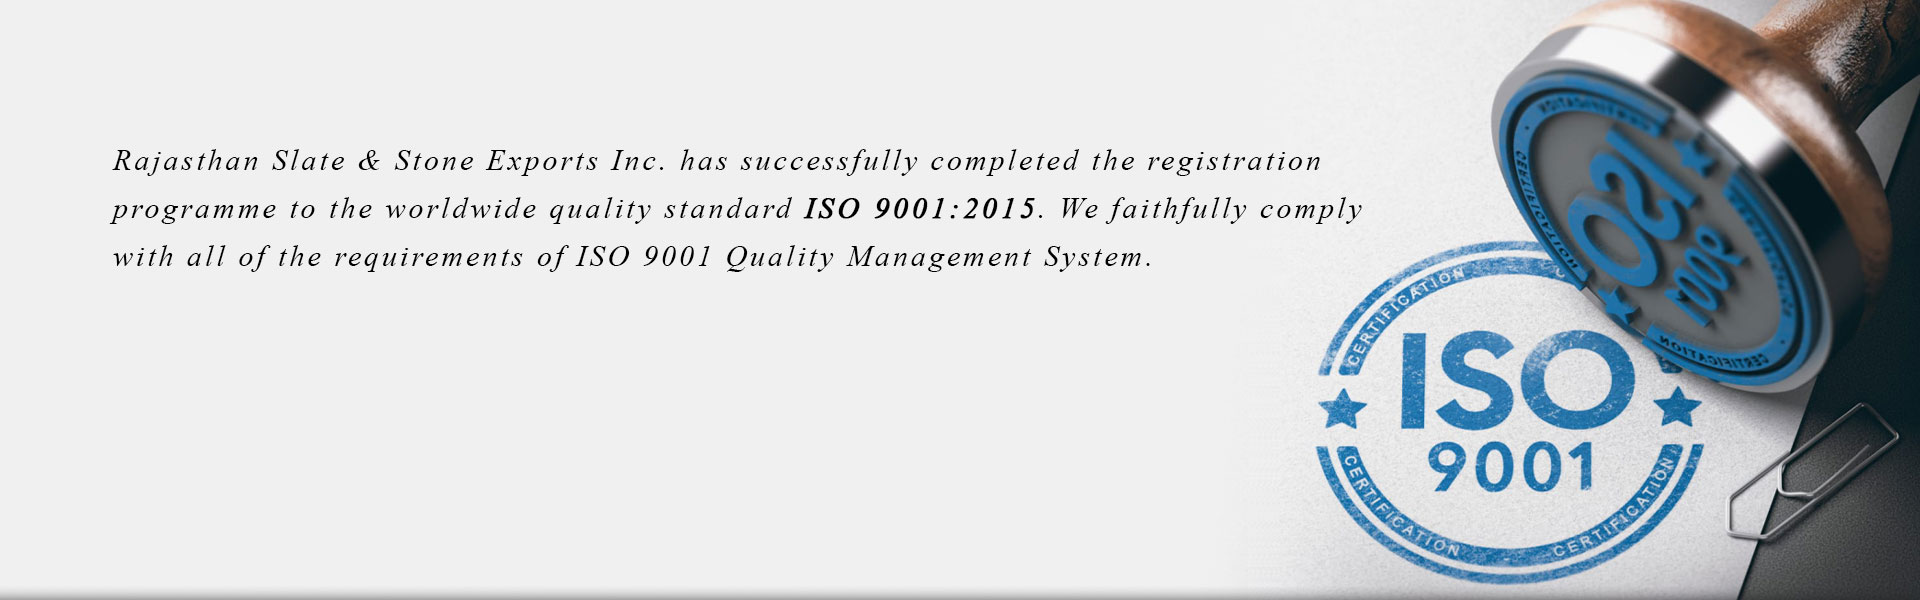 ISO Certified Natural Stones Company in India